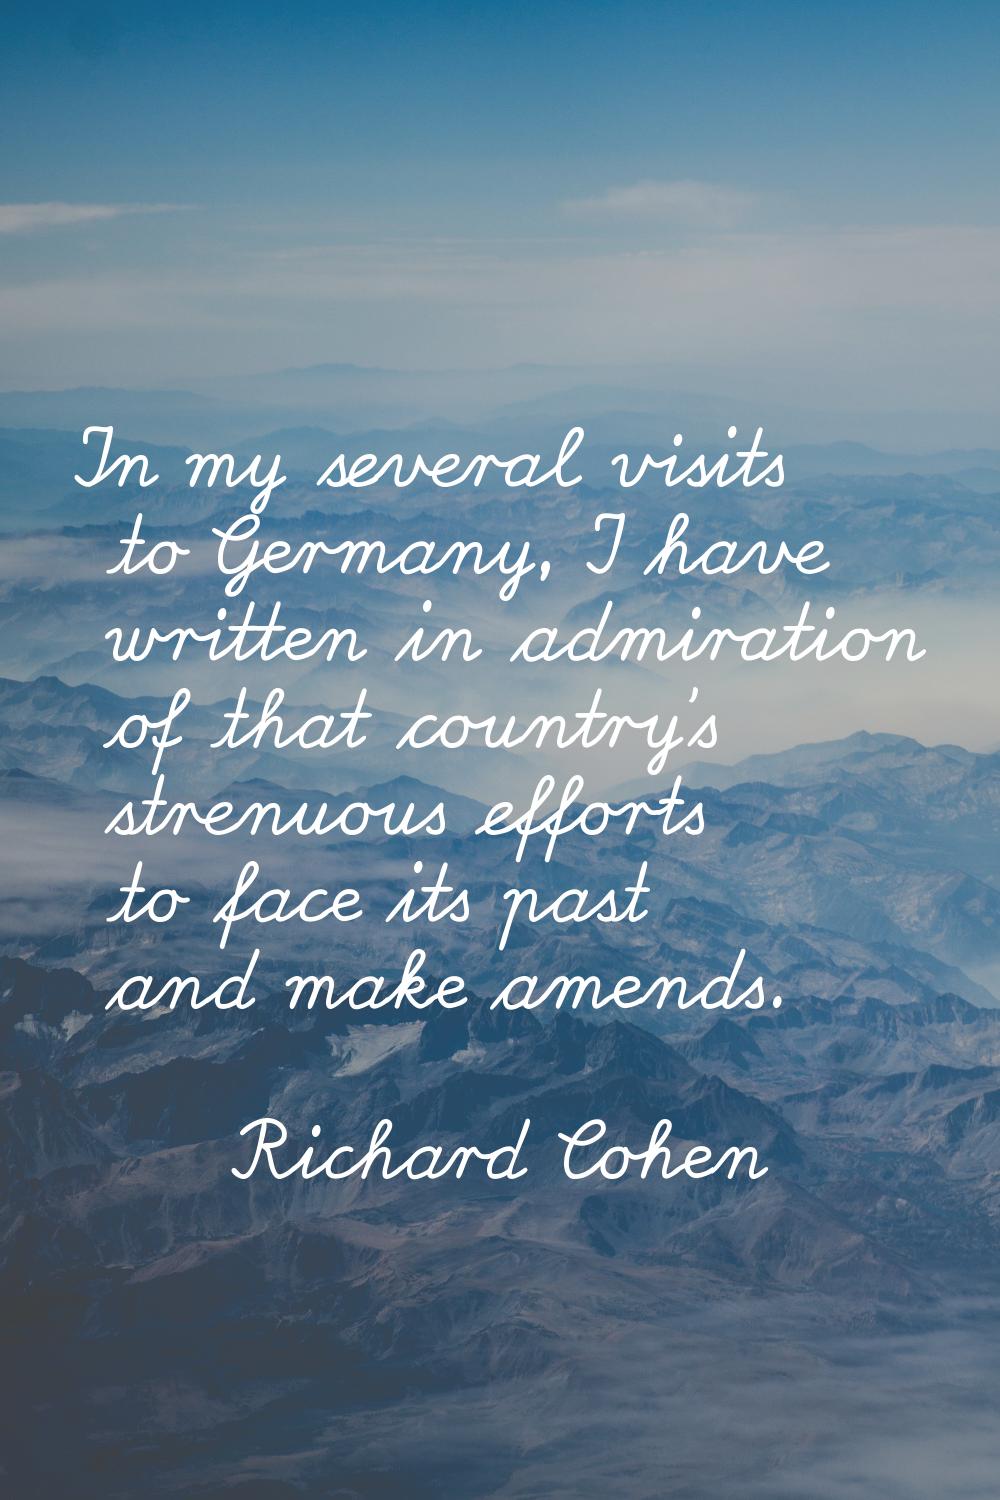 In my several visits to Germany, I have written in admiration of that country's strenuous efforts t